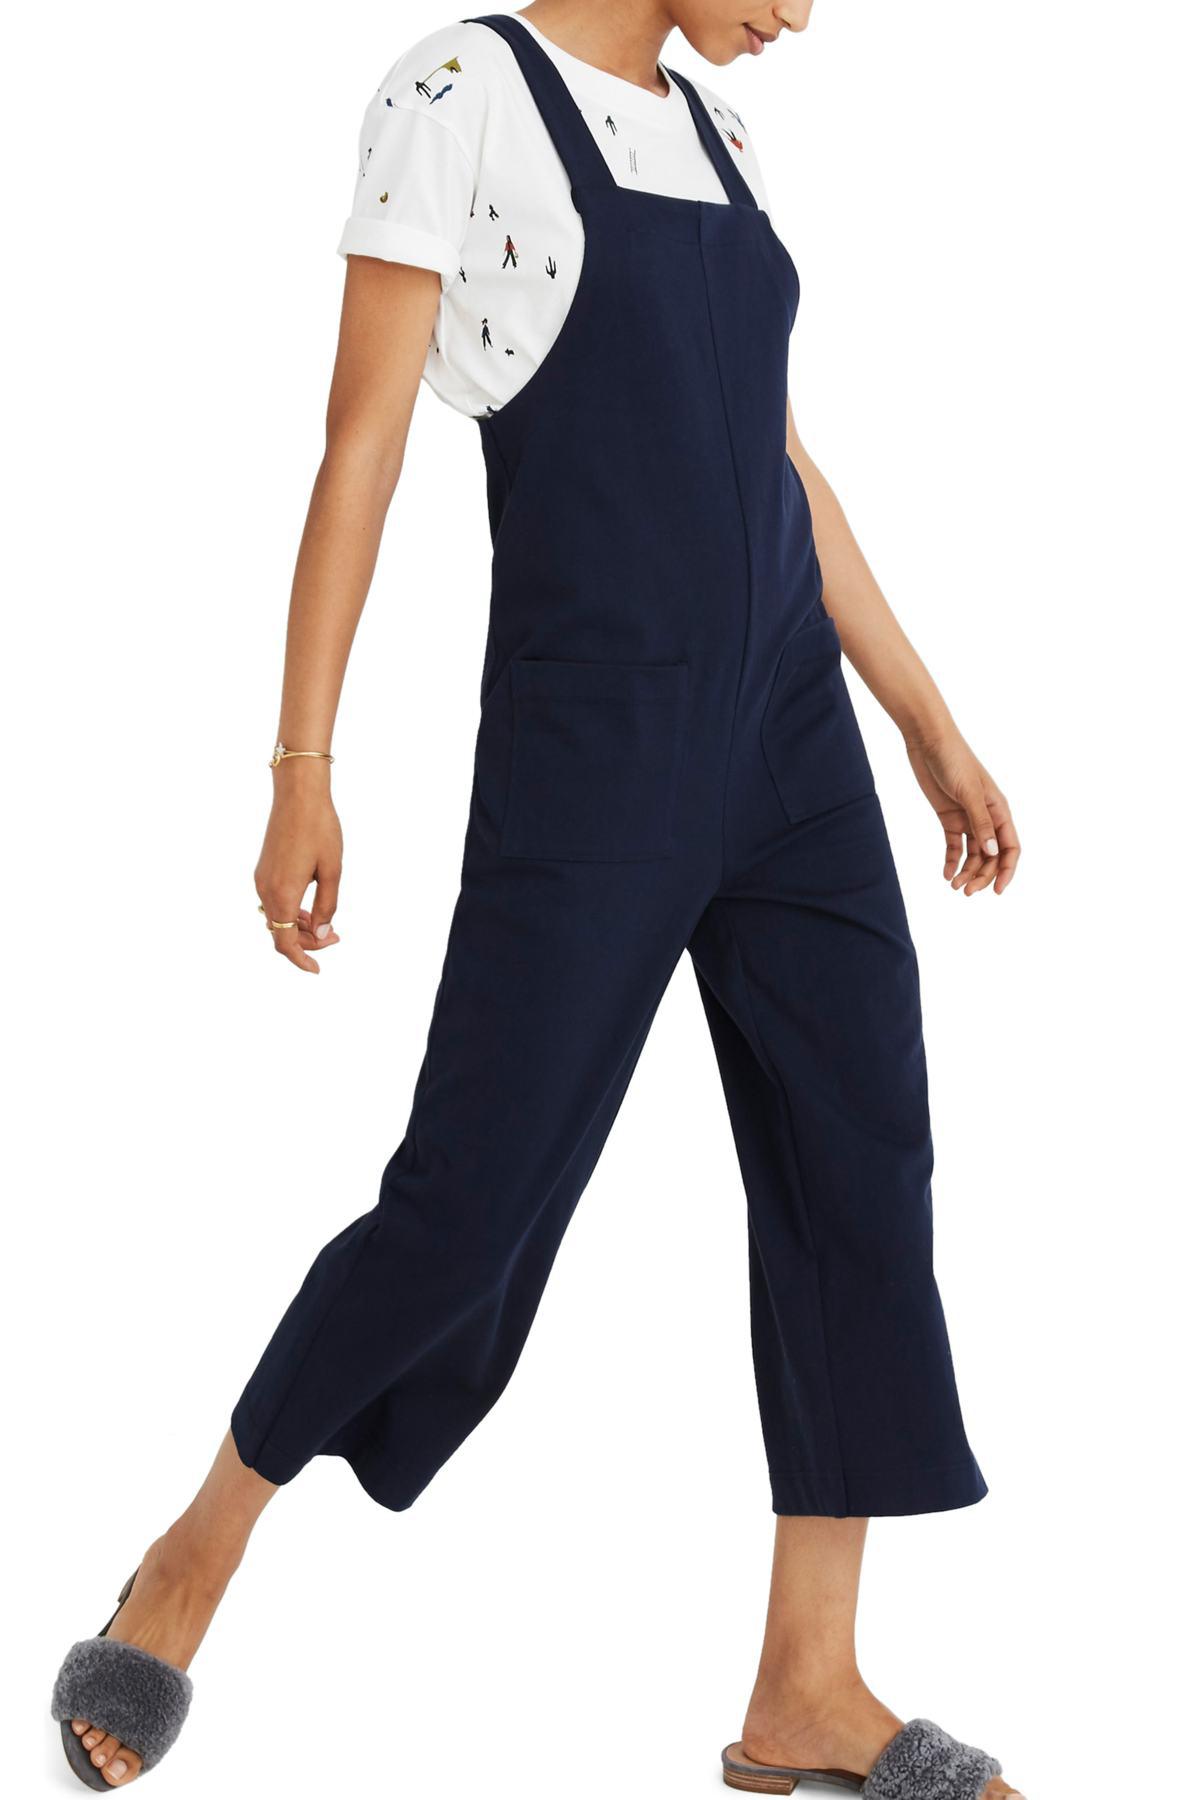 Madewell Denim Knit Patch Pocket Overalls in Deep Navy (Blue) - Lyst